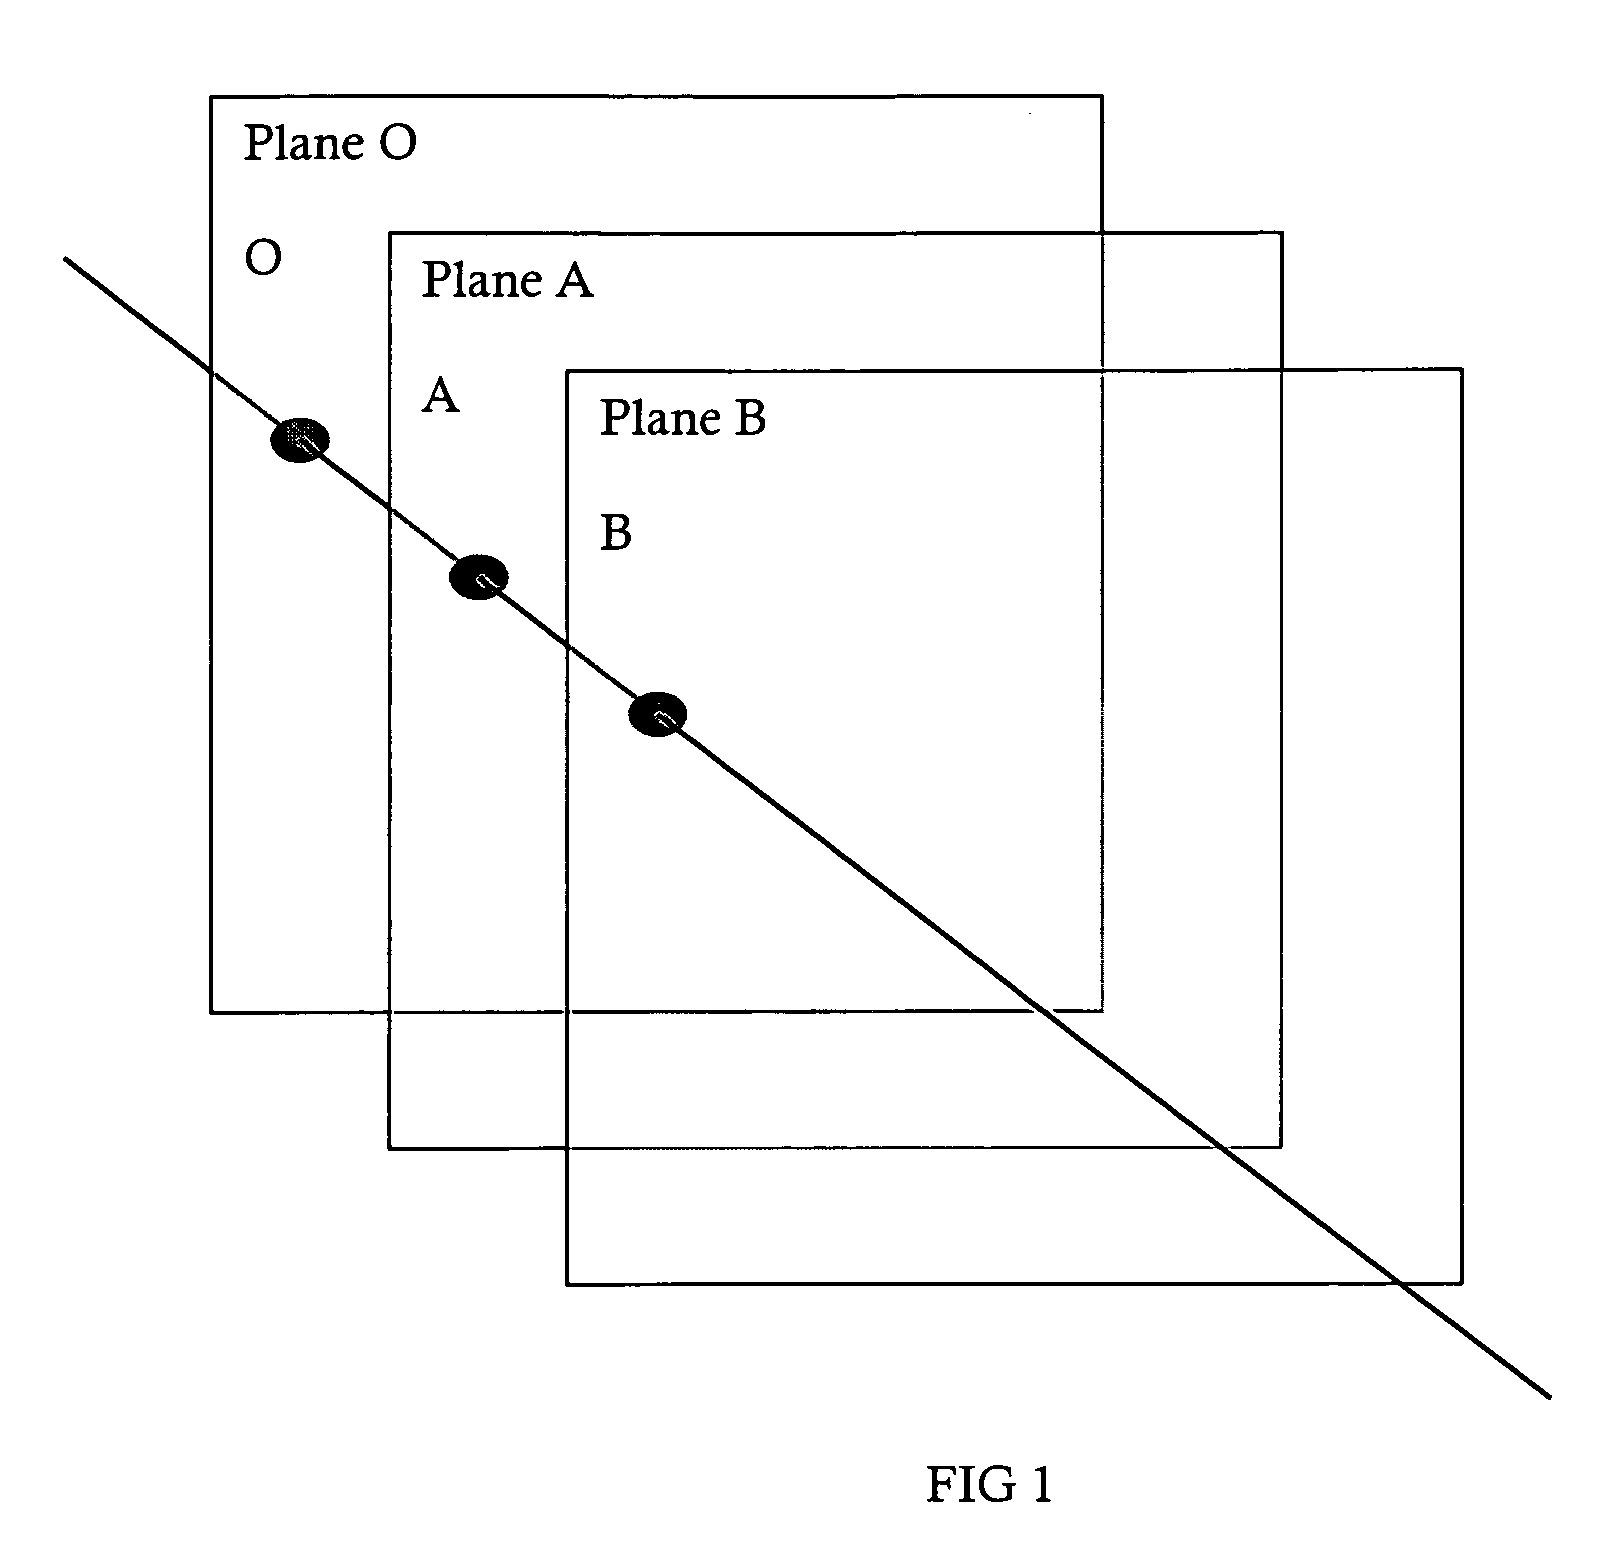 Method of image manipulation to fade between two images